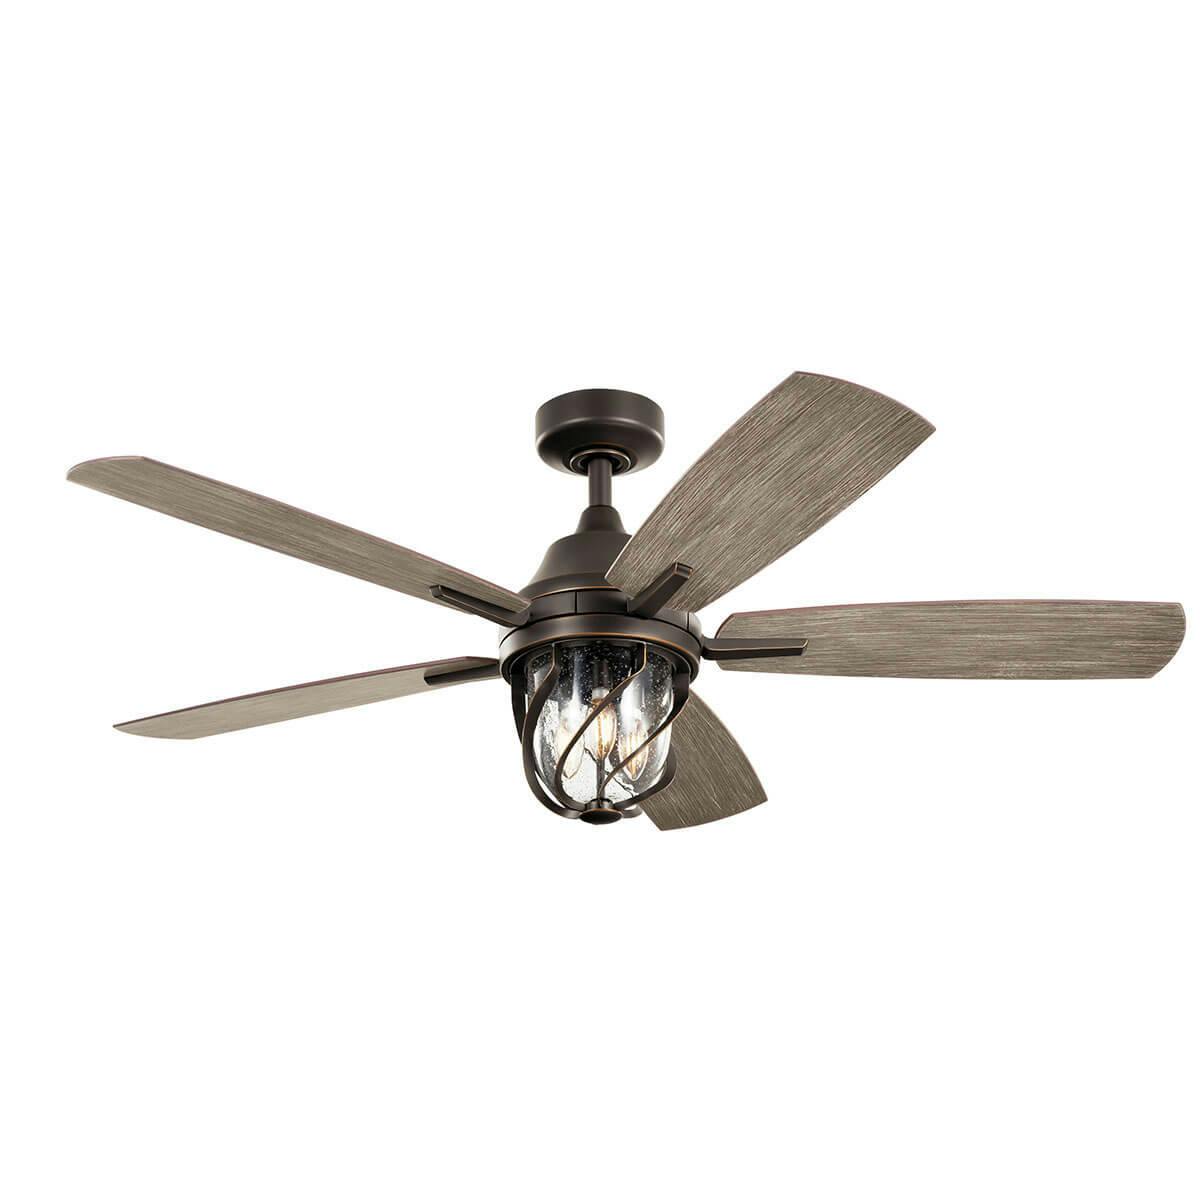 Lydra™ LED 52" Ceiling Fan Olde Bronze™ on a white background